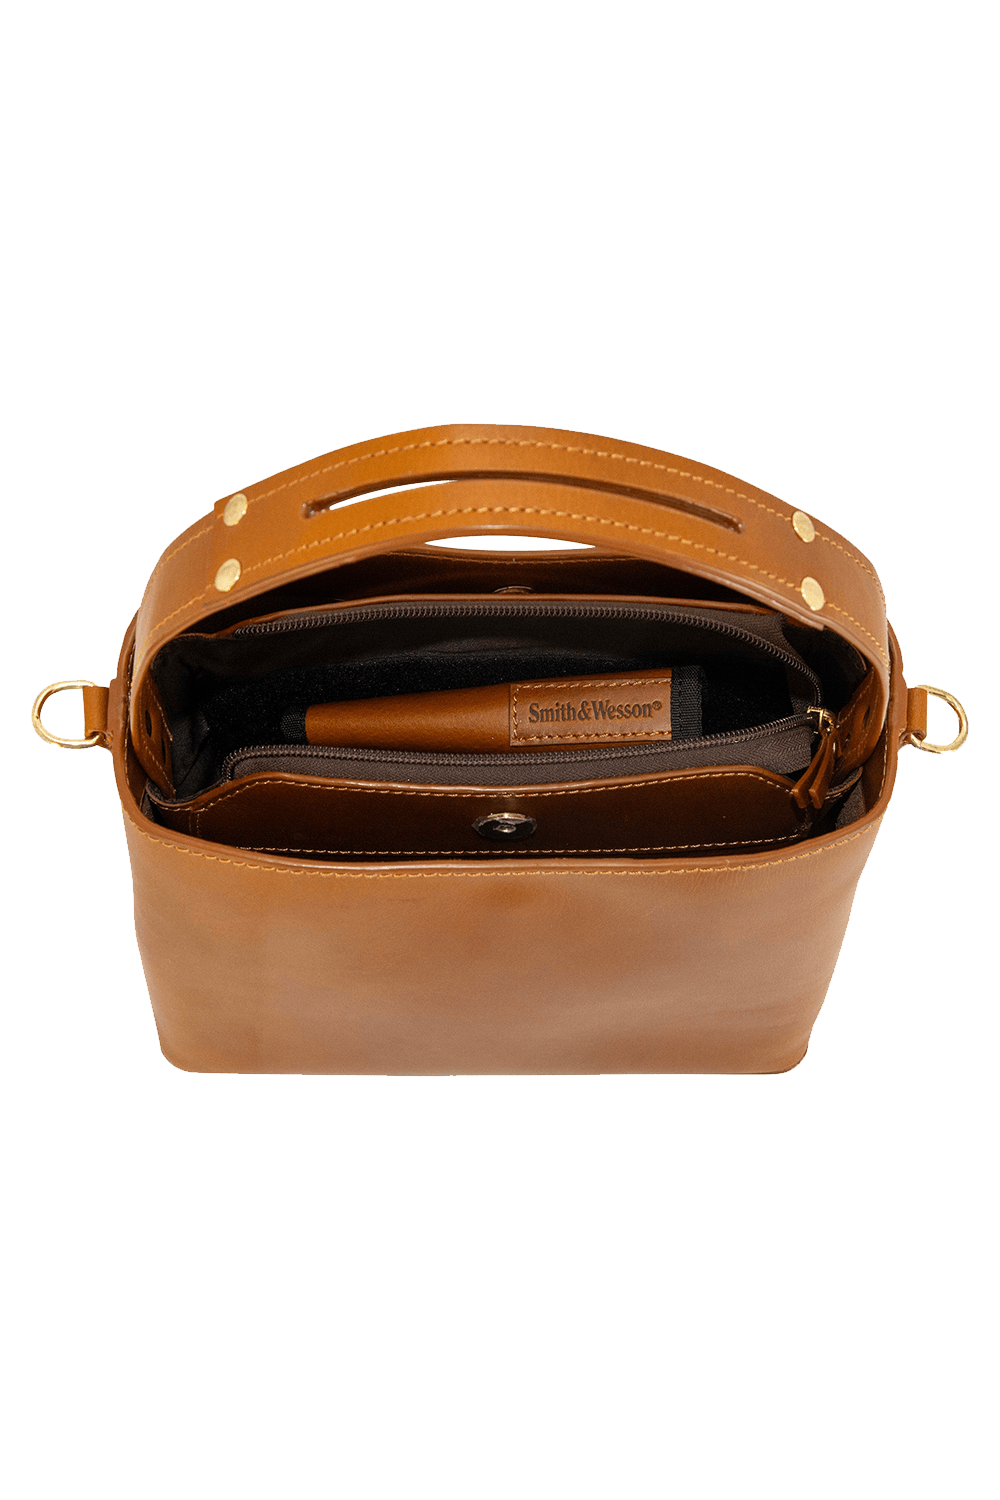 Smith & Wesson Concealed Carry Bucket Bag